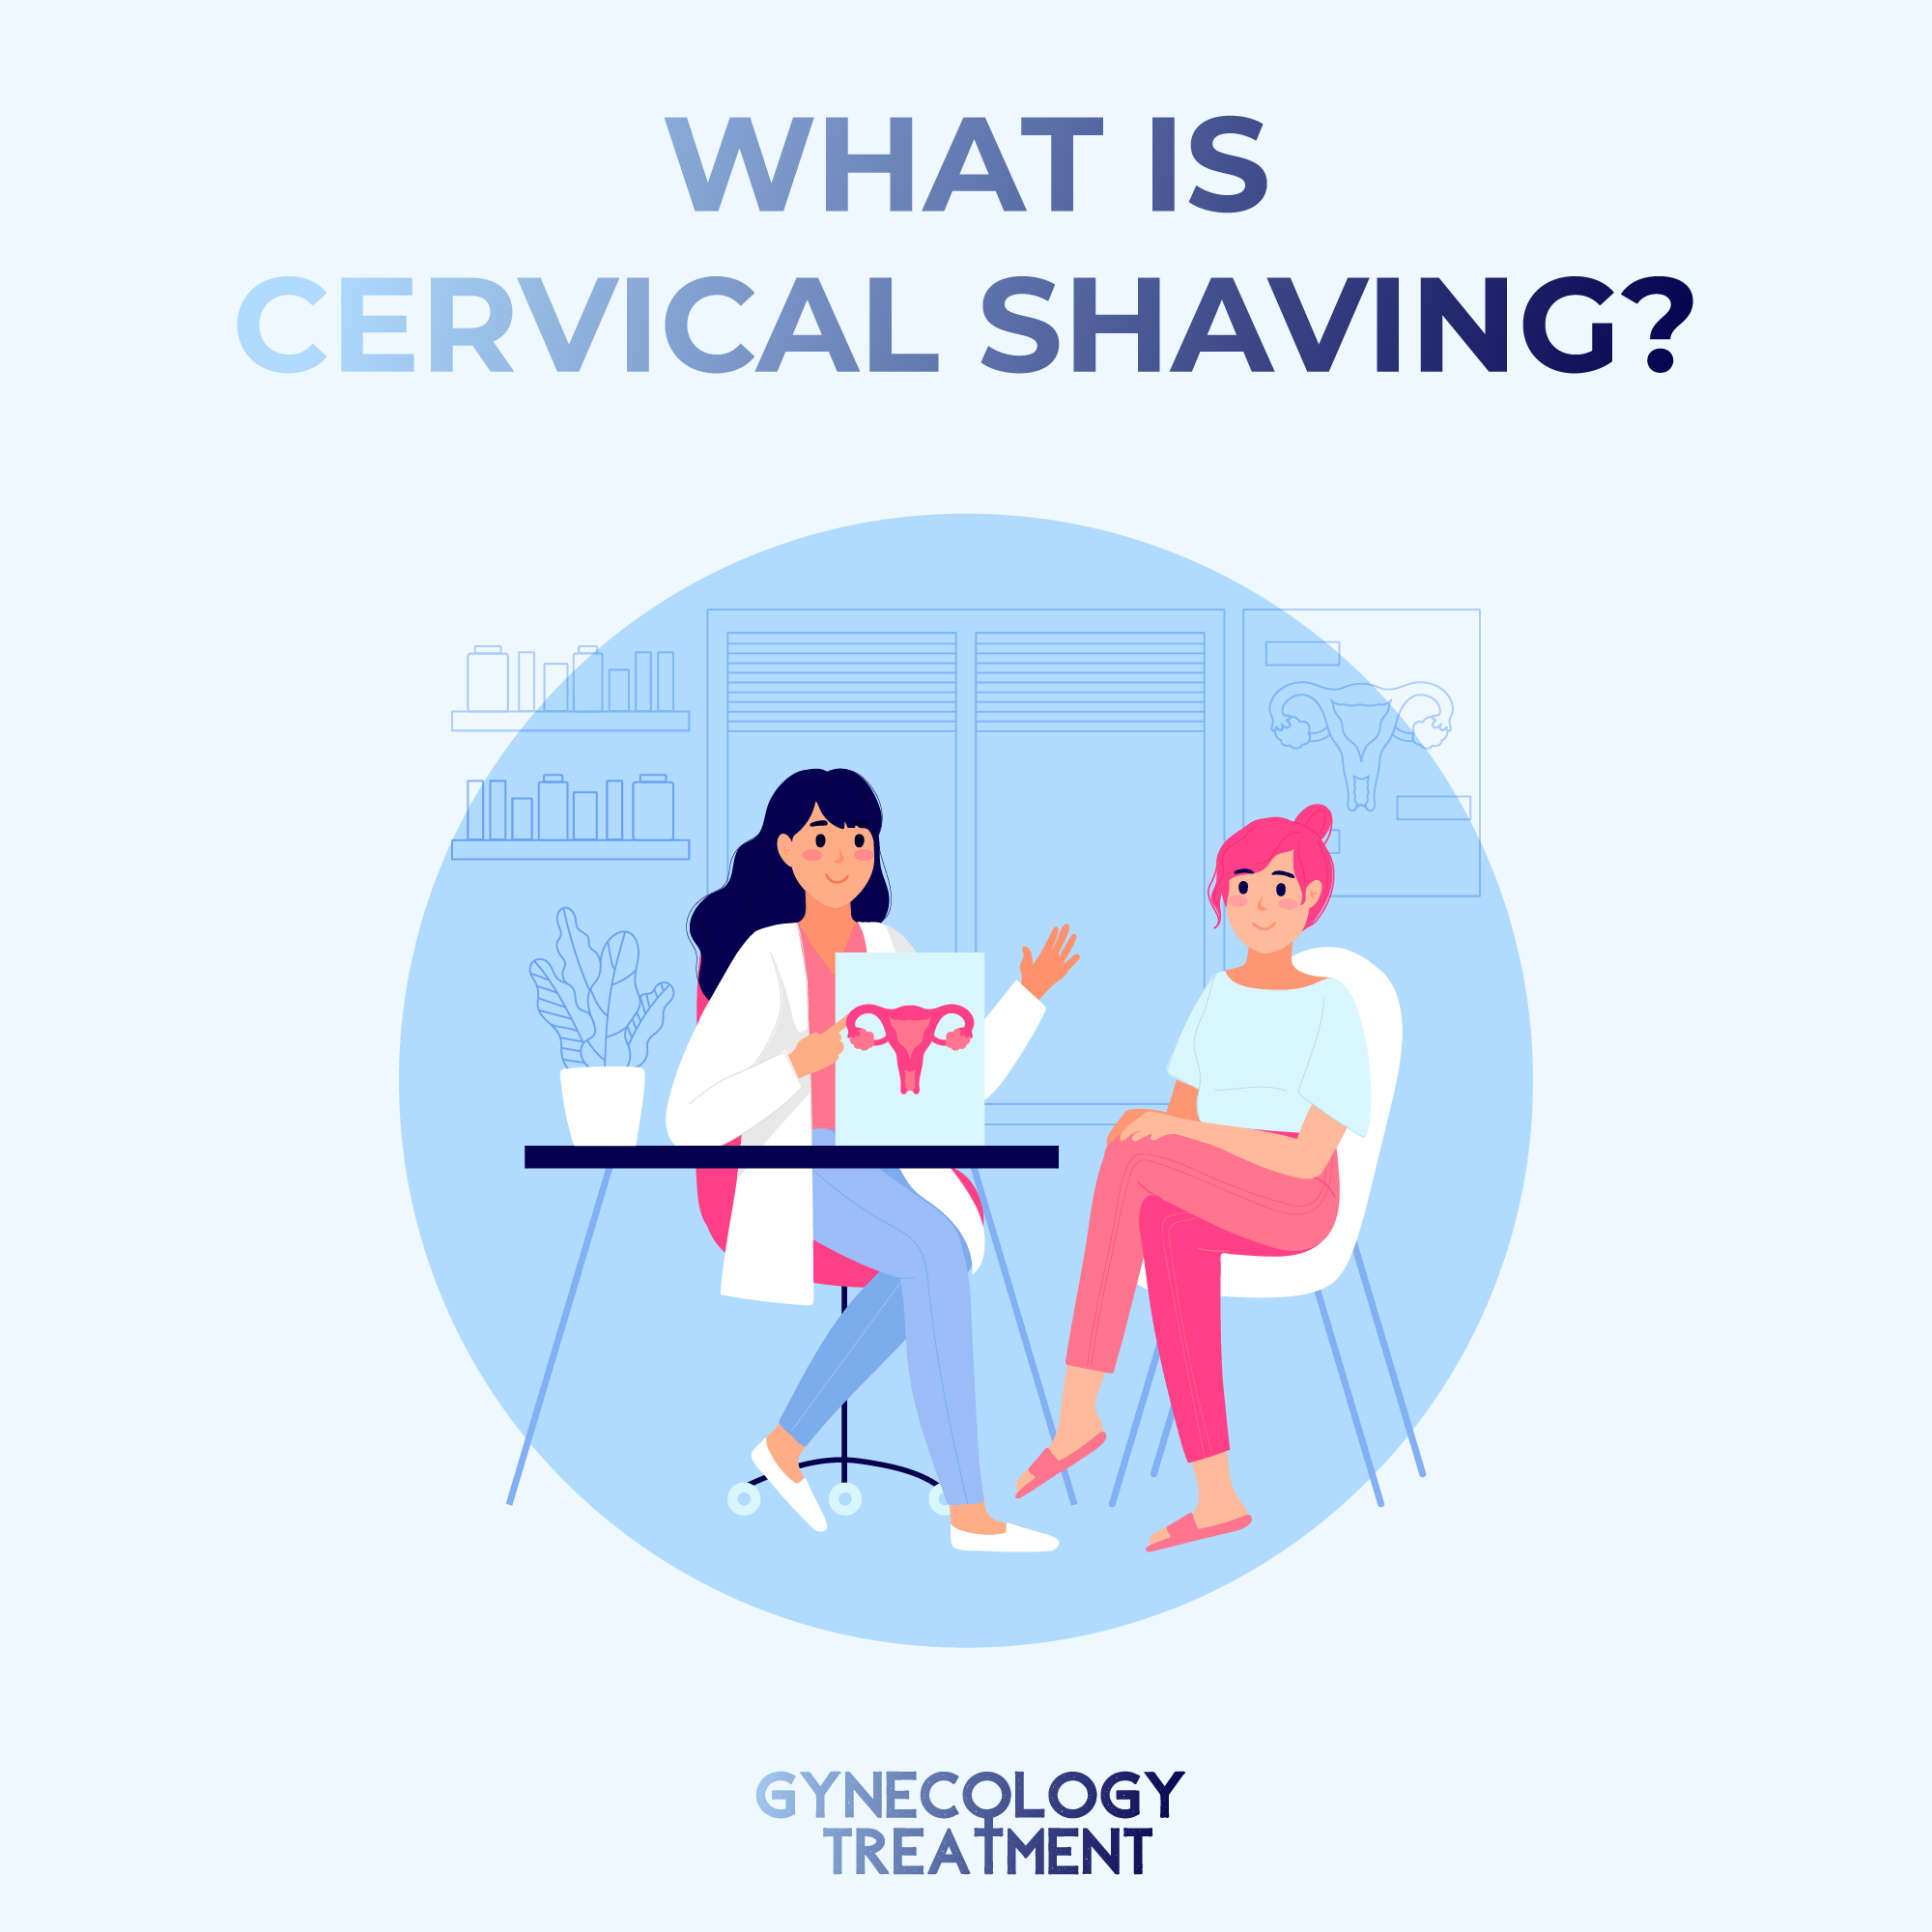 What is cervical shaving?